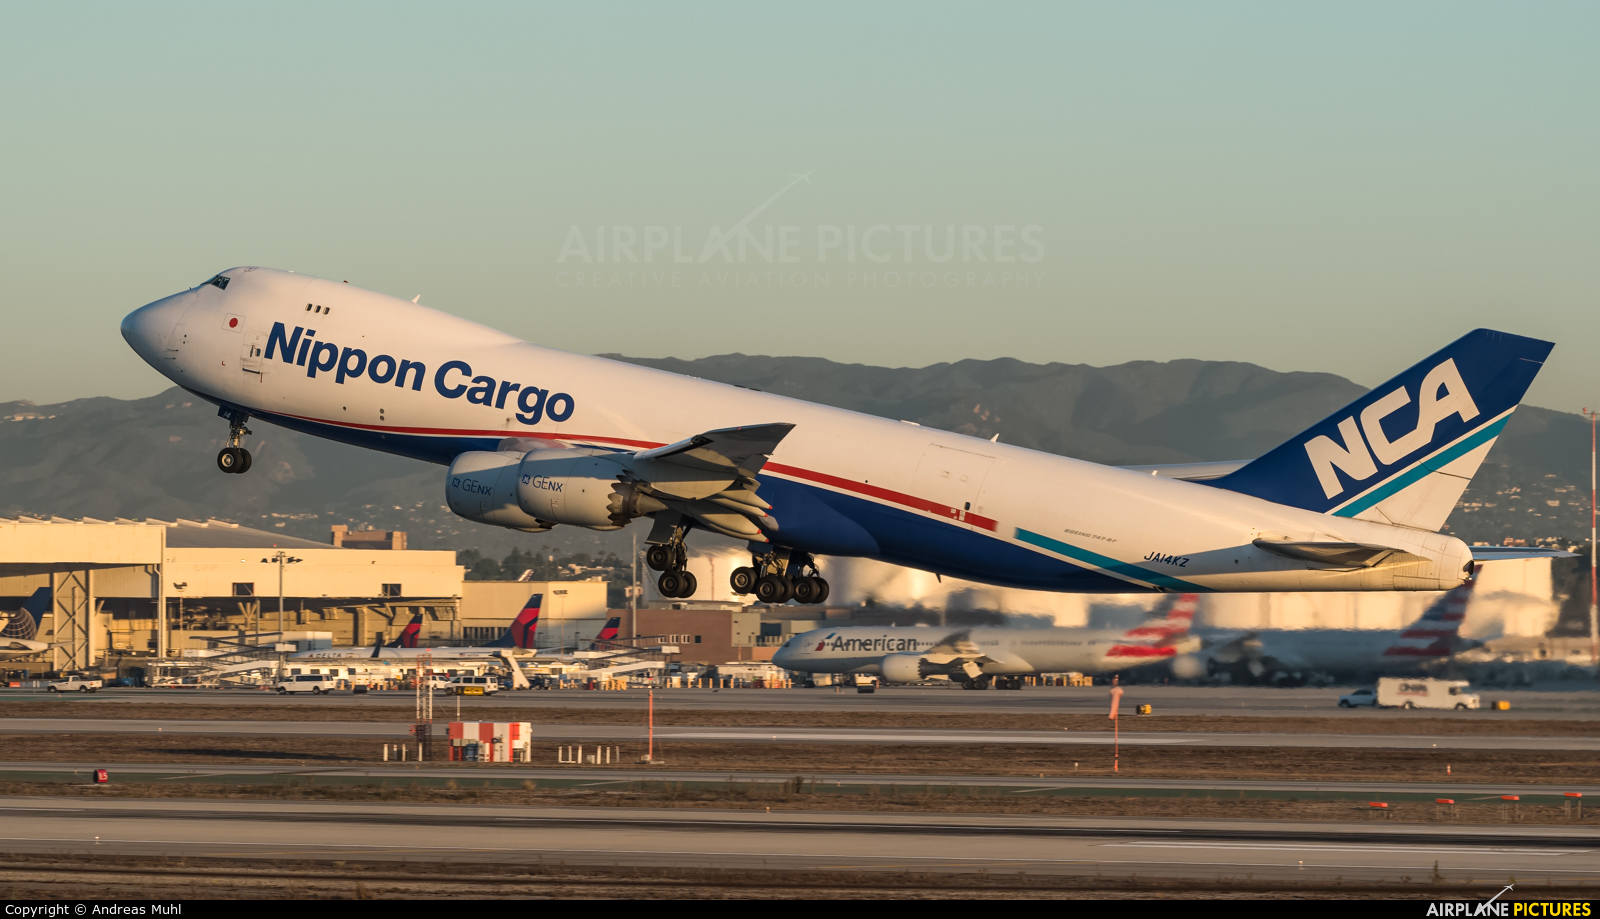 Nippon Cargo Airlines JA14KZ aircraft at Los Angeles Intl